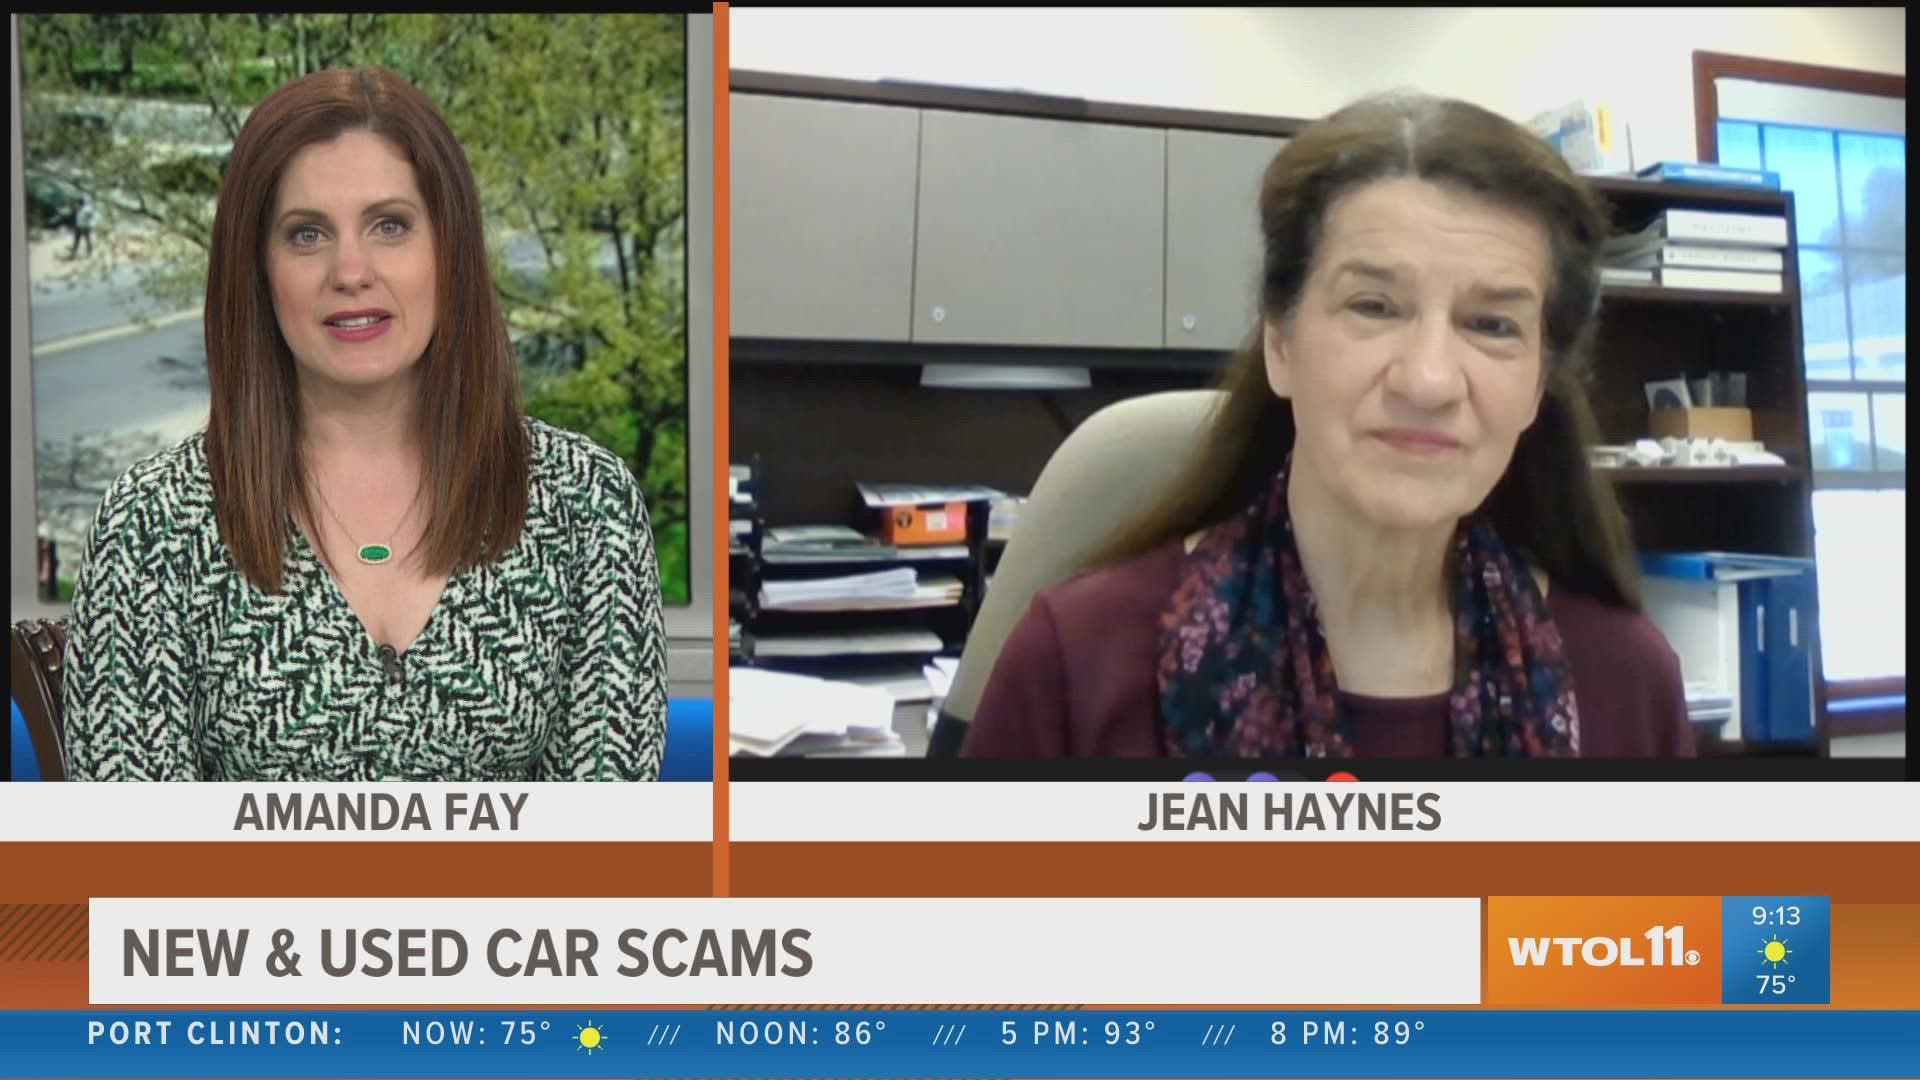 Jean Haynes from the Better Business Bureau talks about new and used car scams to avoid.